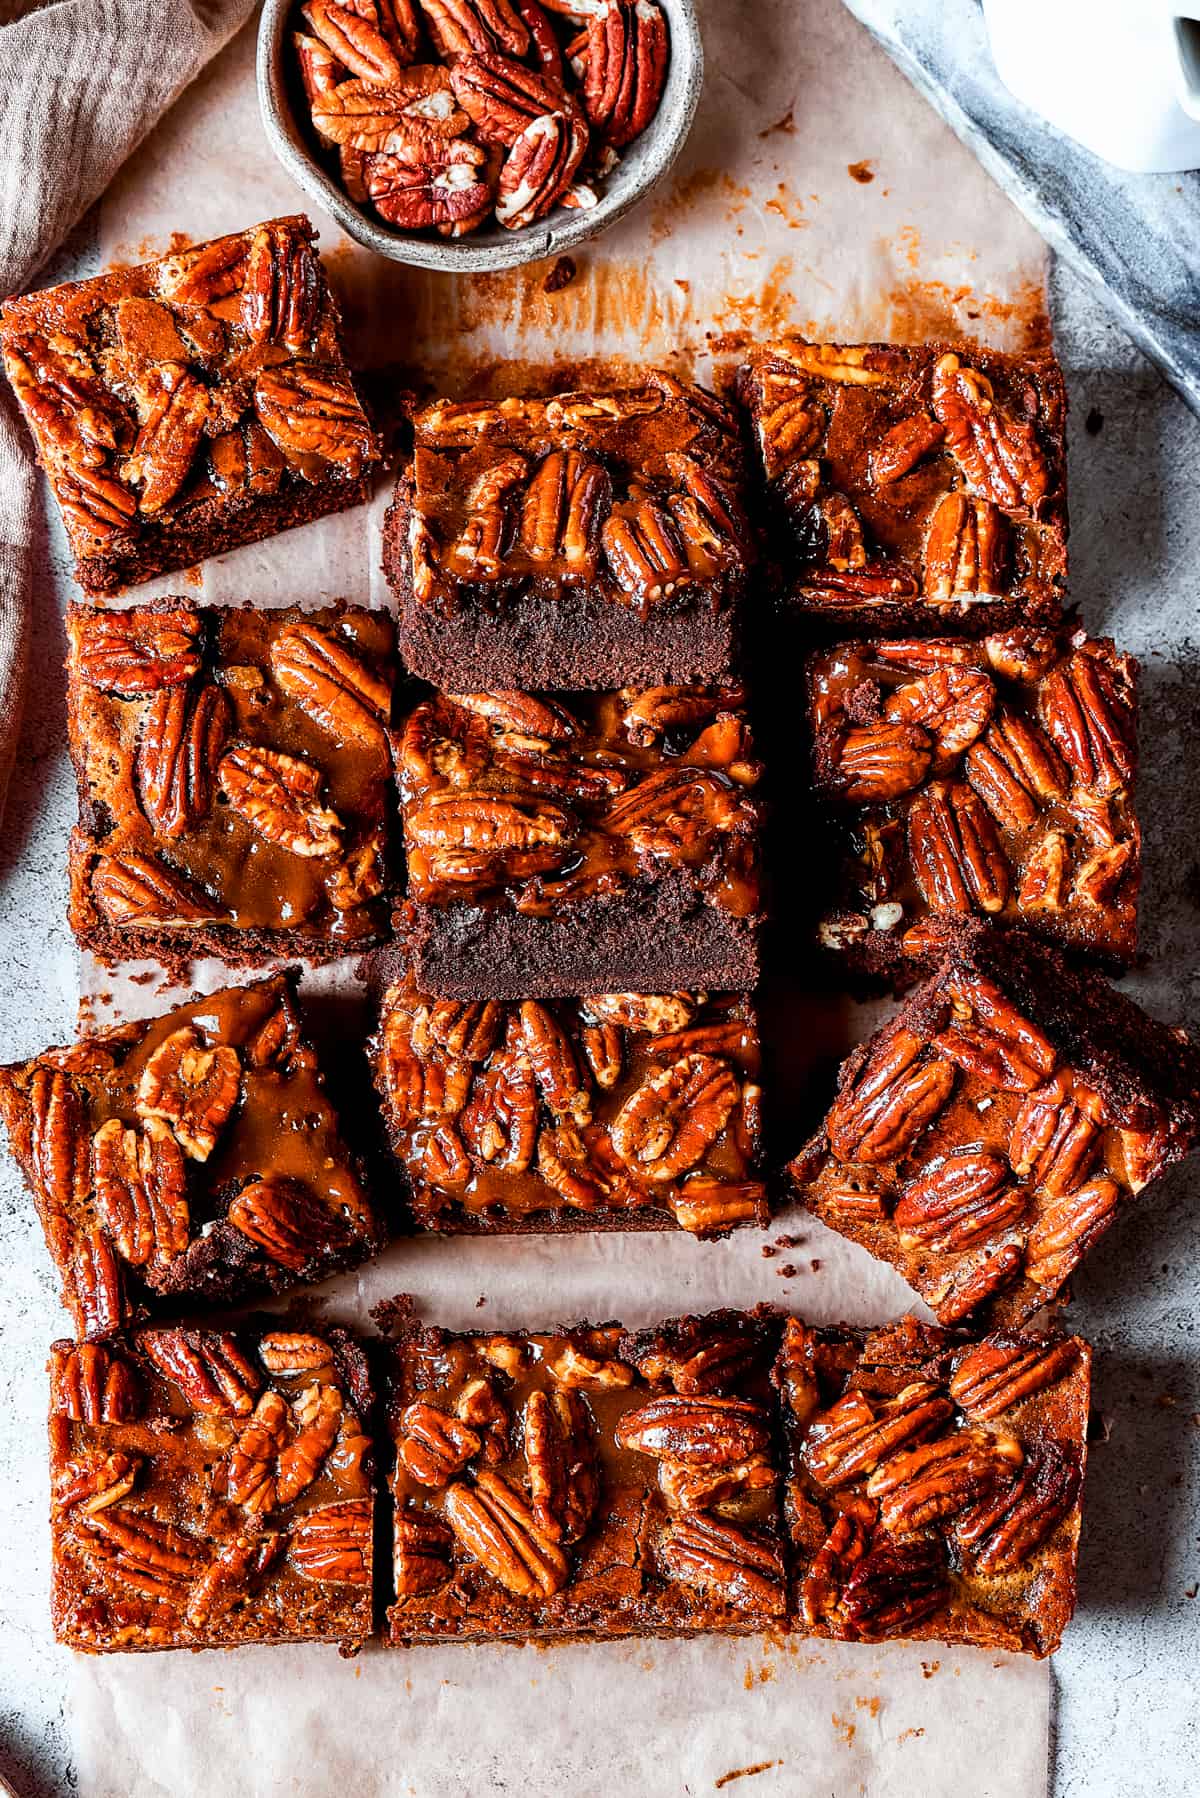 Pecan brownie squares arranged on a light surface.